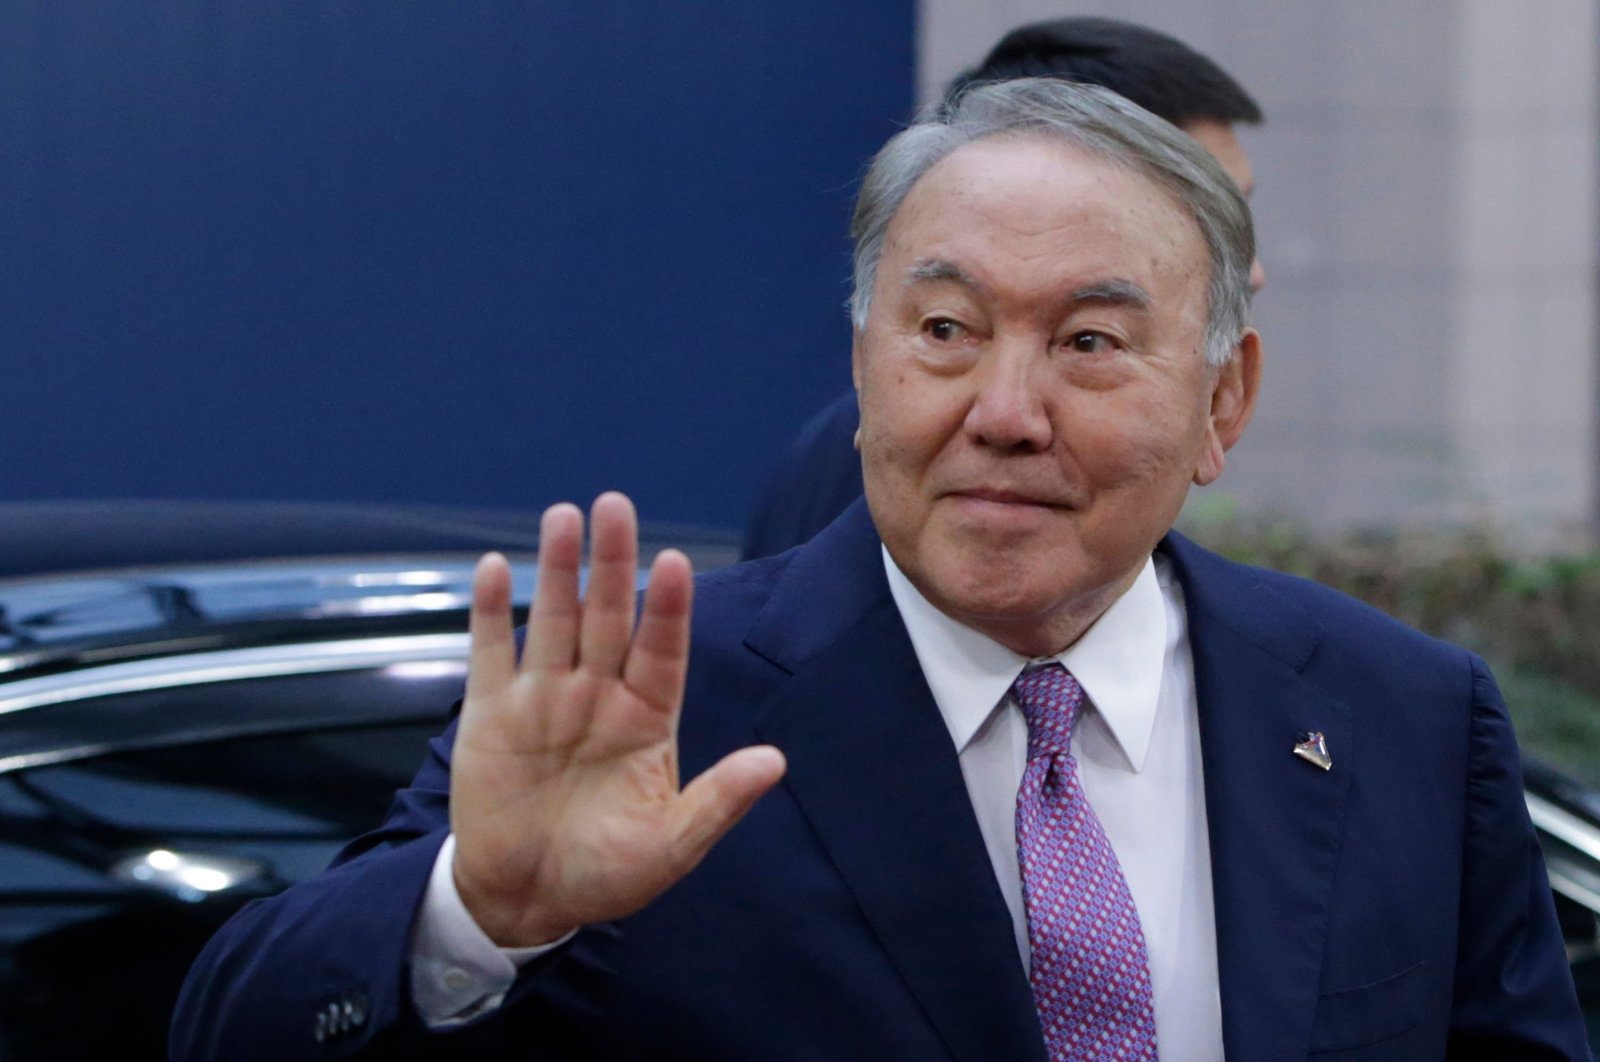 Kazakh President Nursultan Nazarbayev waves as he arrives for a Asia Europe Meeting (ASEM) at the European Council in Brussels, Belgium, Oct. 19, 2018. (AFP Photo)